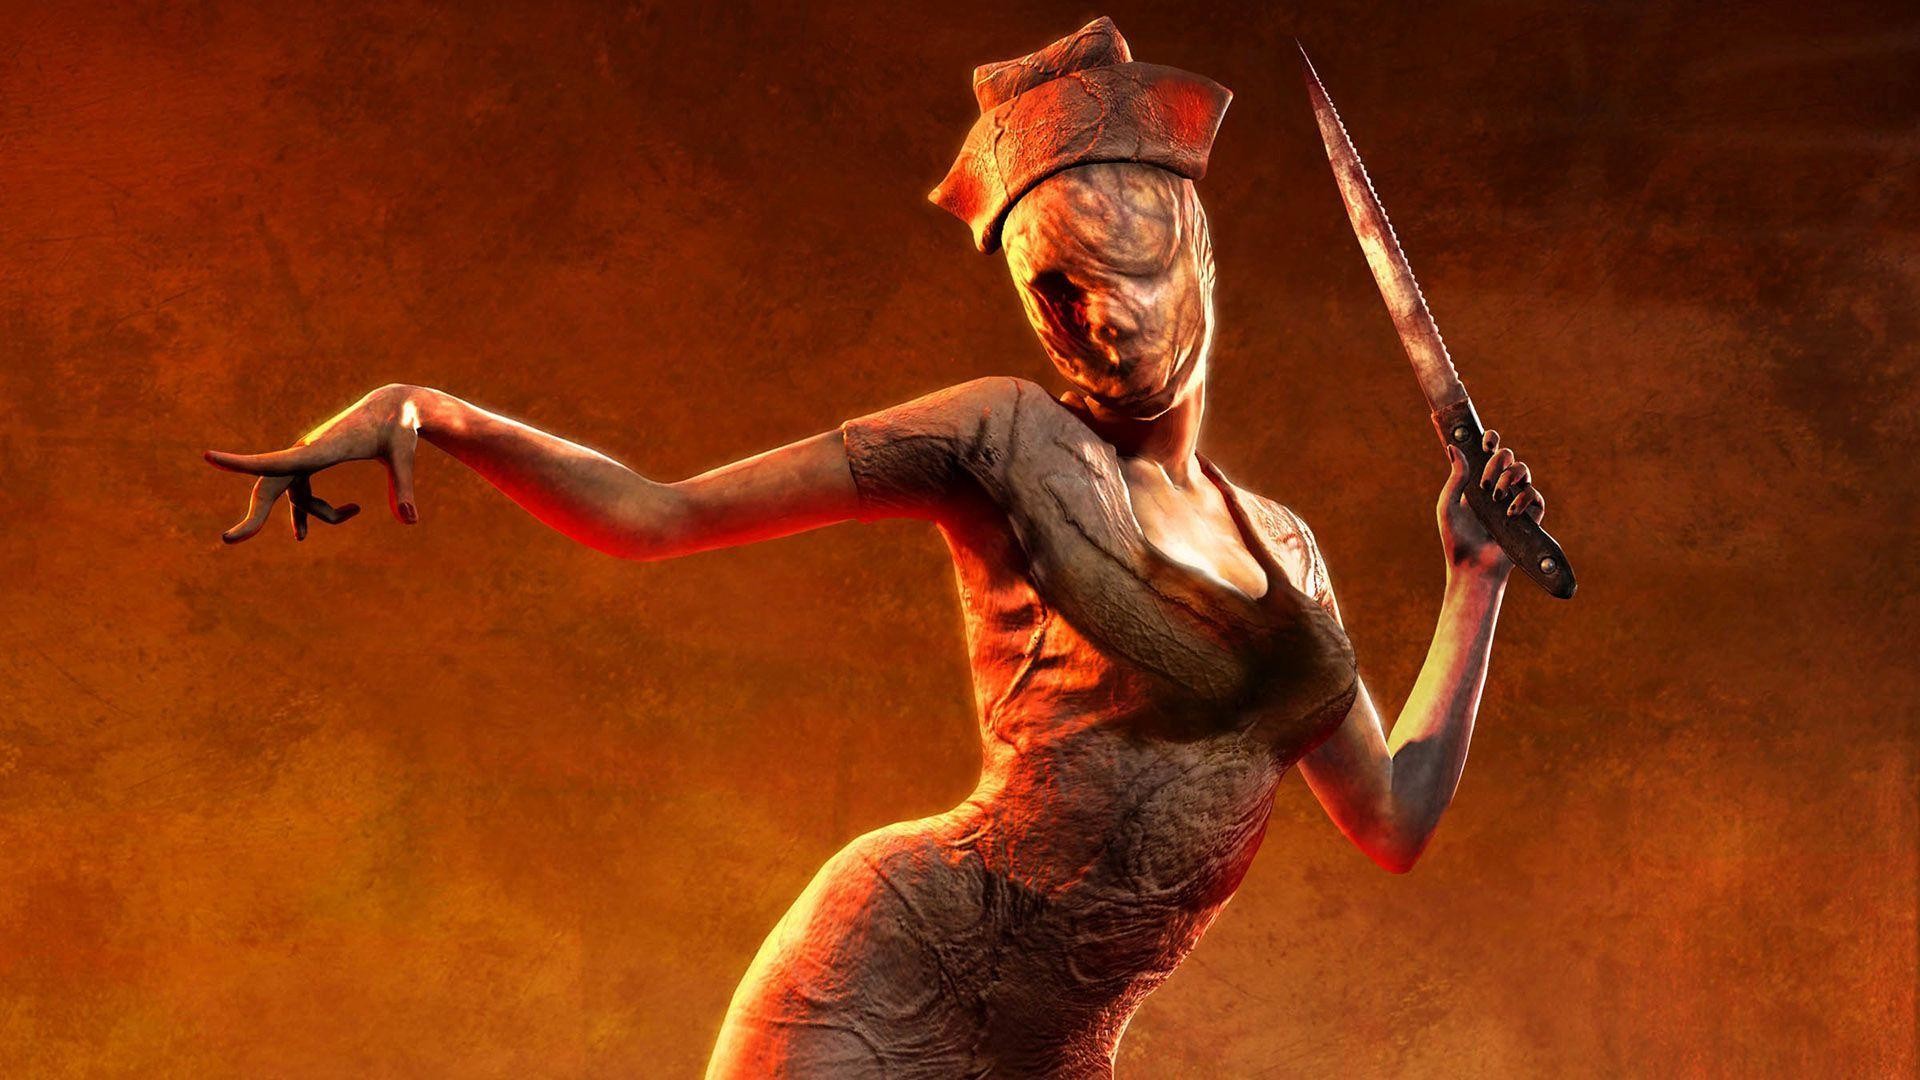 1920x1080 Silent hill creepy nurse - Image #589 - Licence: Free for Personal Use -